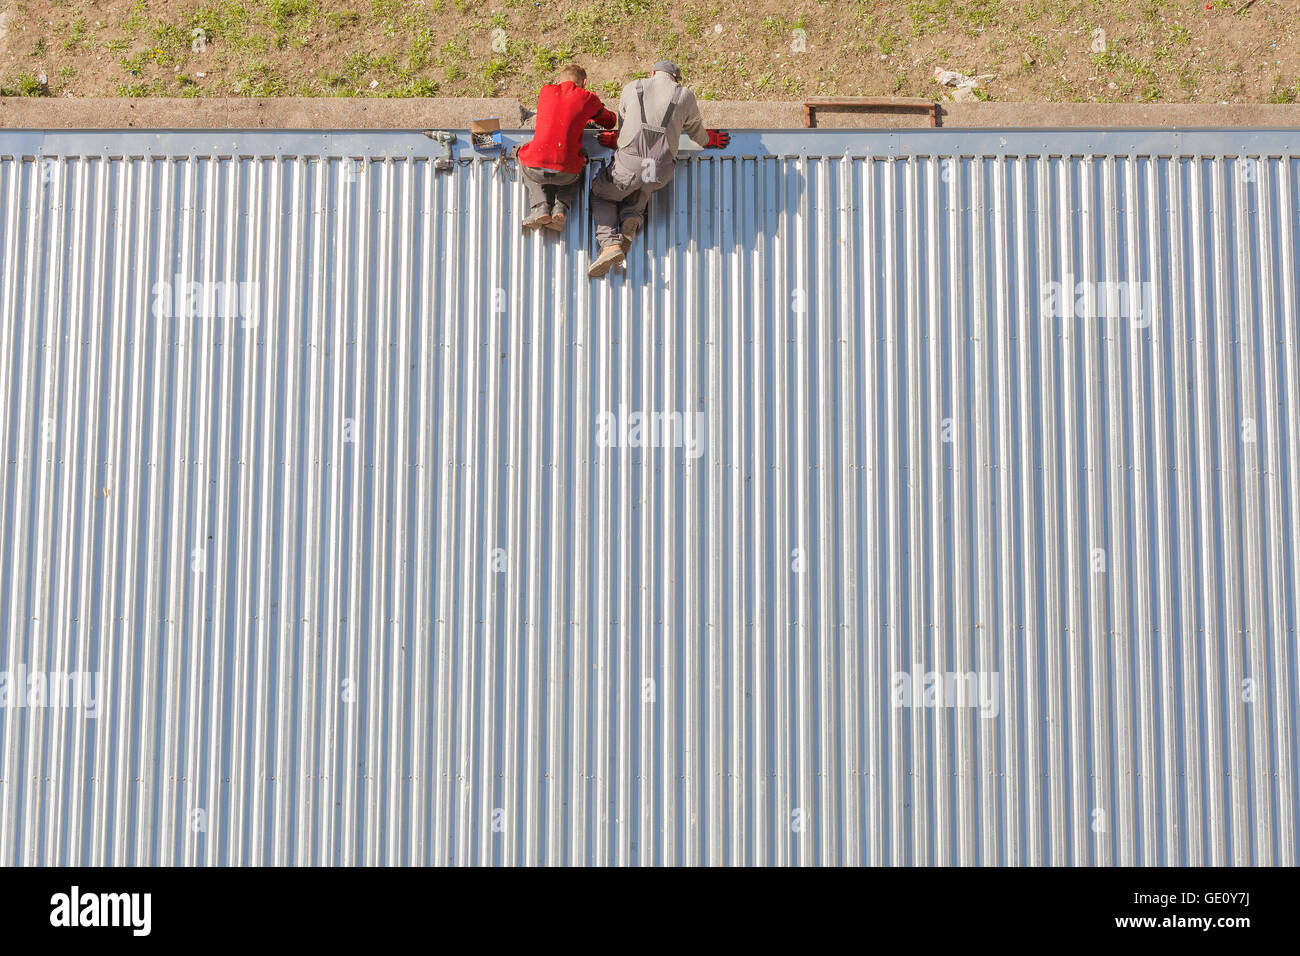 Szczecin, Poland - April 07, 2016: Workers repairing a store roof made of corrugated metal sheets, picture taken from above. Stock Photo